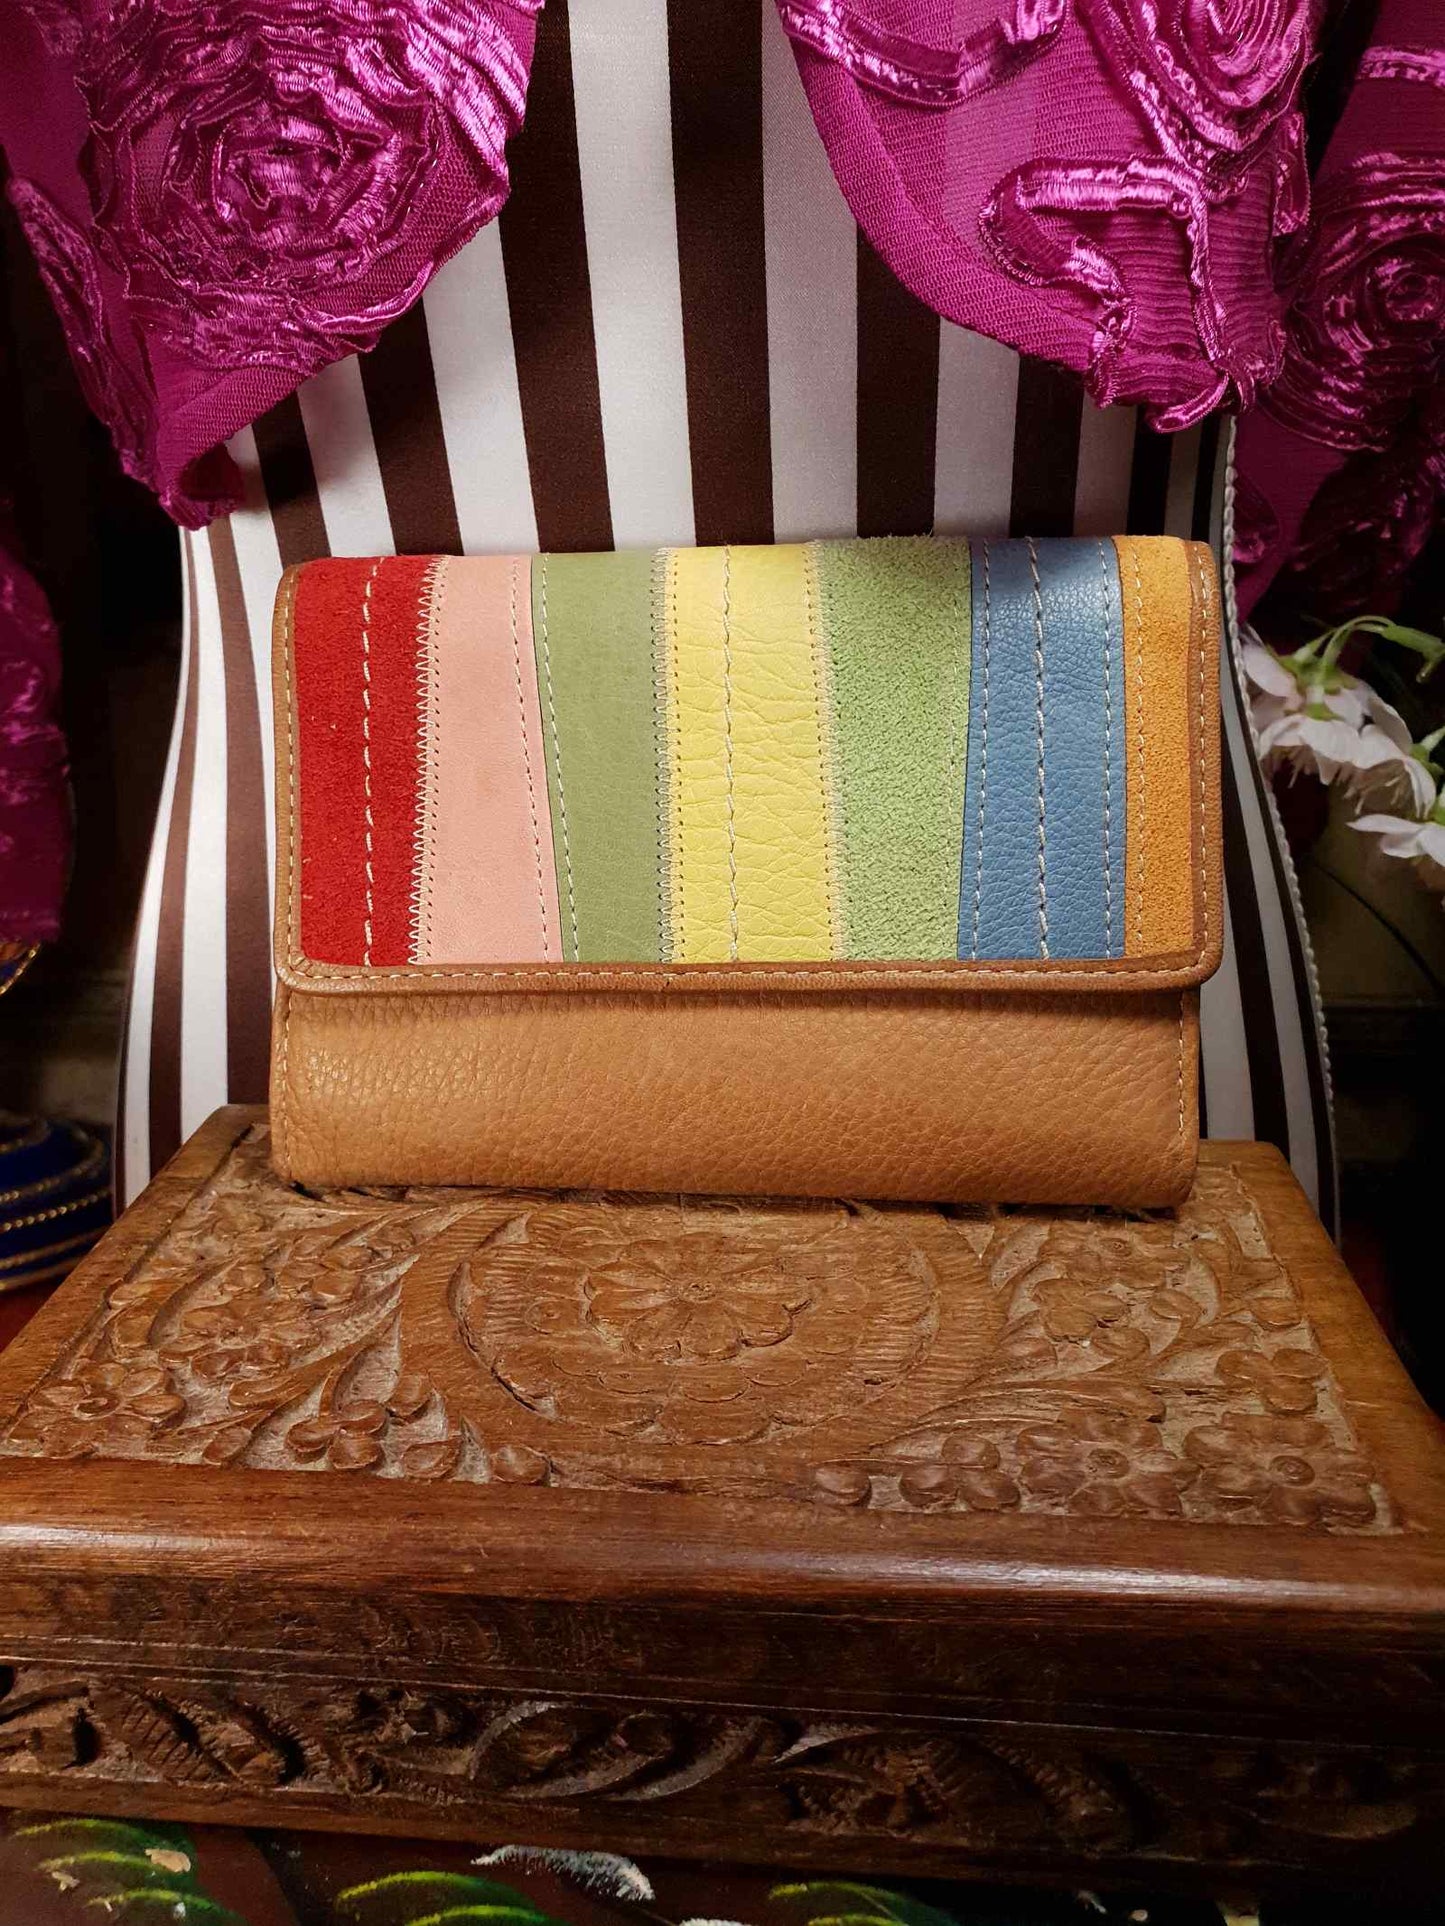 Fossil Leather Ladies Wallet Purse Multi Coloured Stripes - Pre-Owned